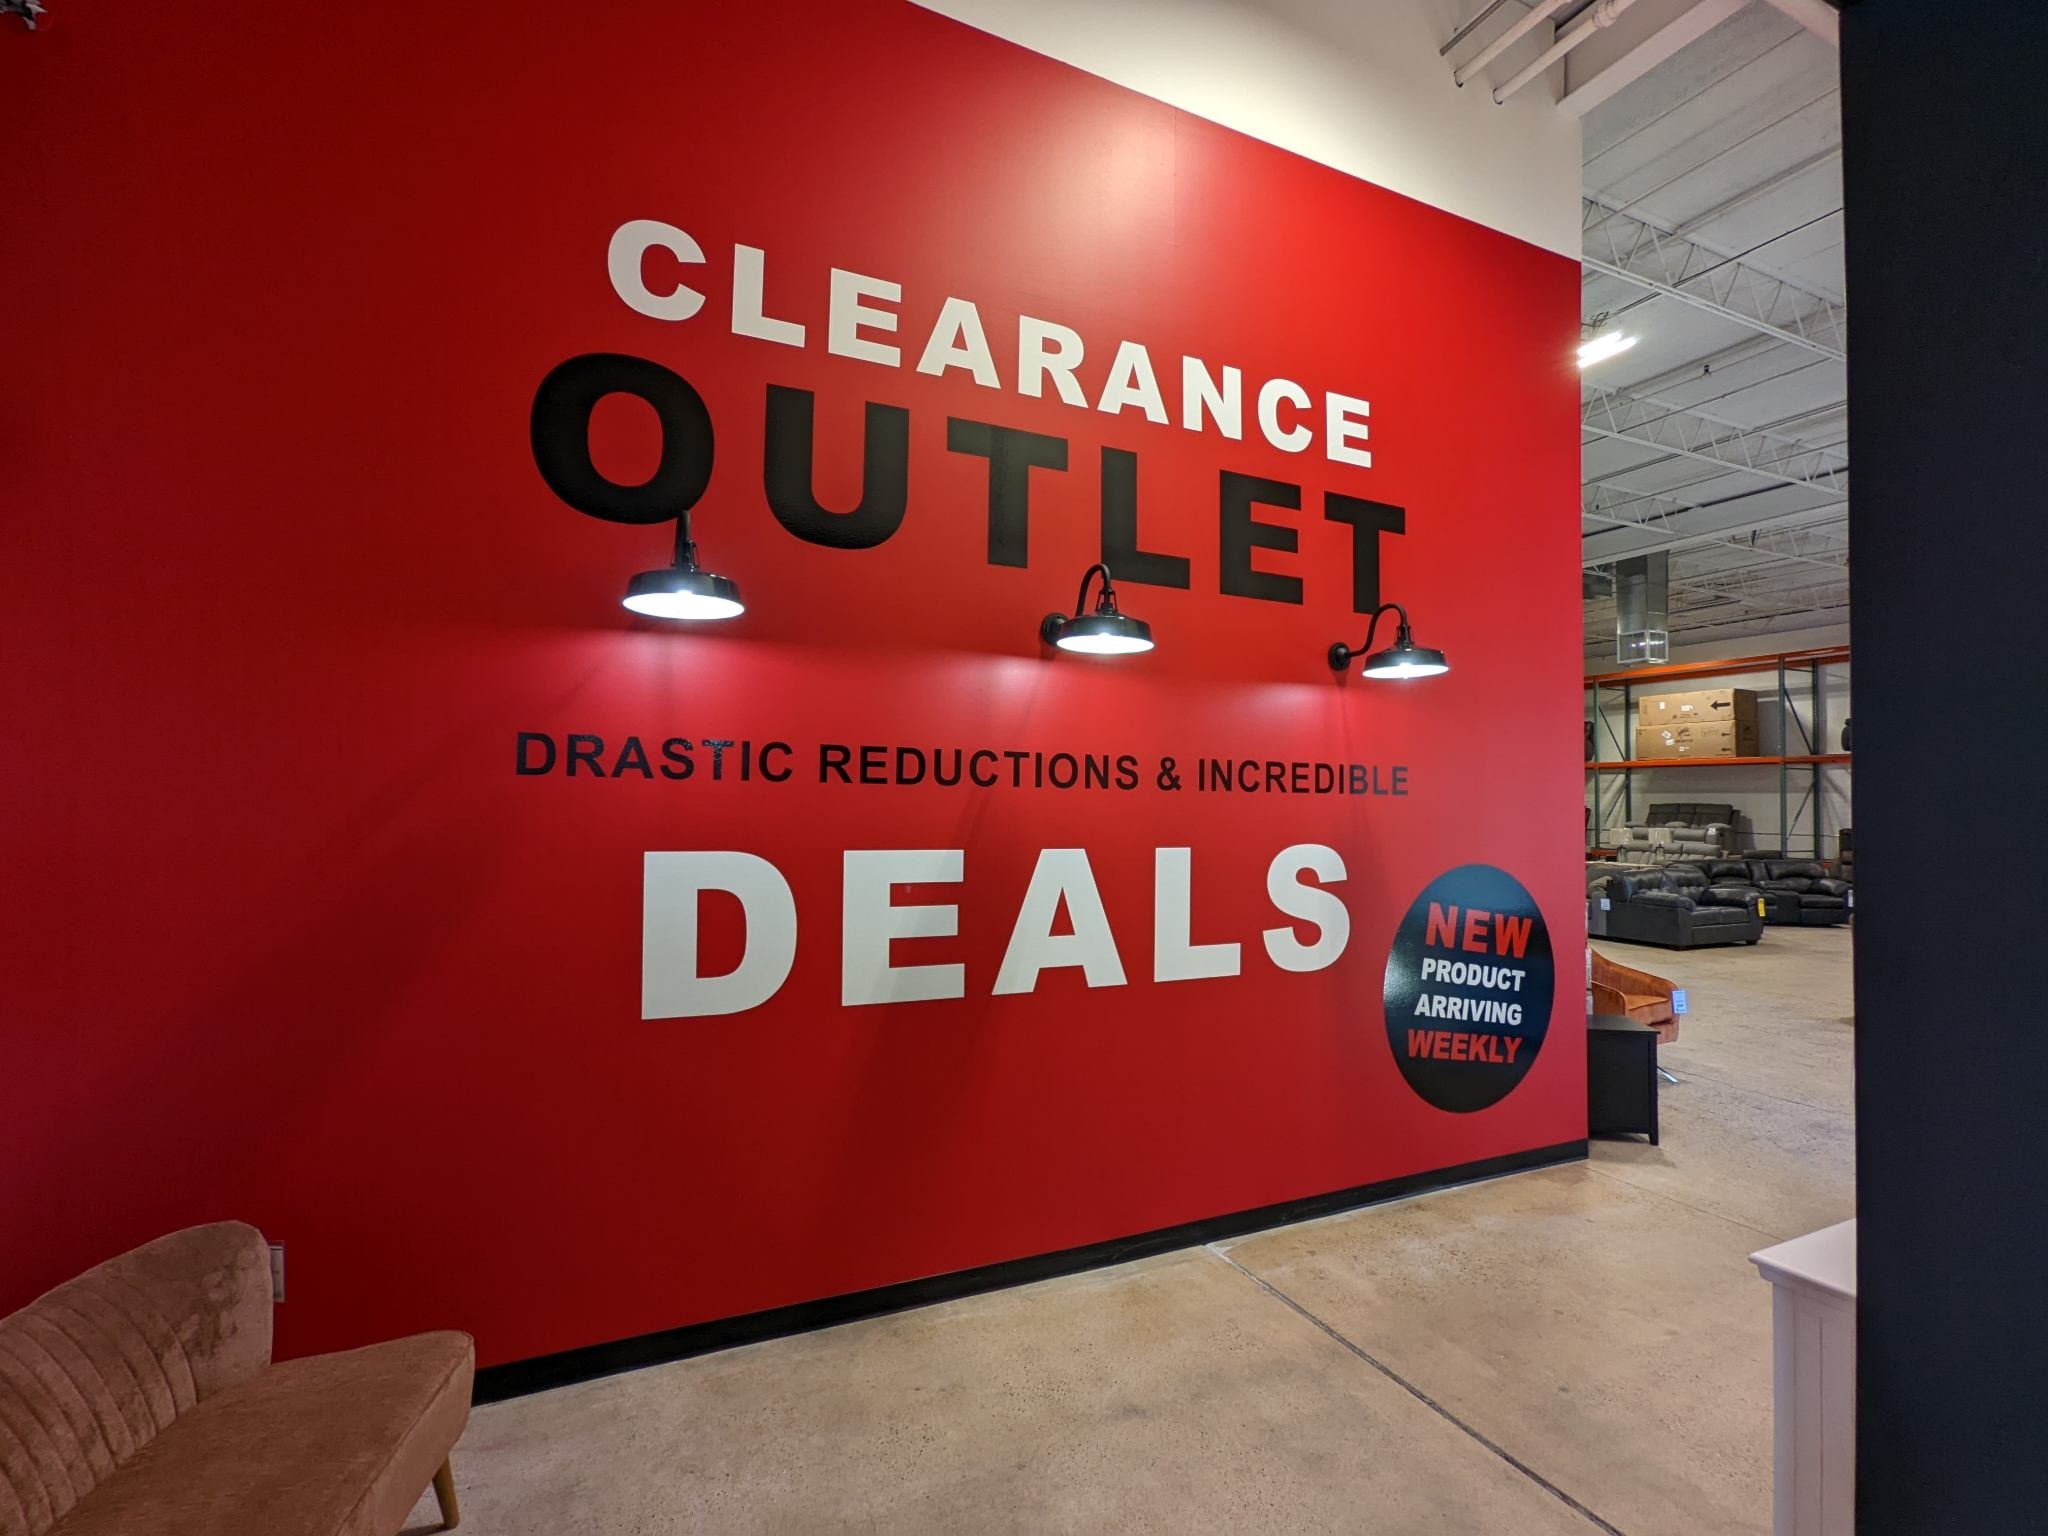 Clearance Outlet, Deals on Furniture & Home Decor